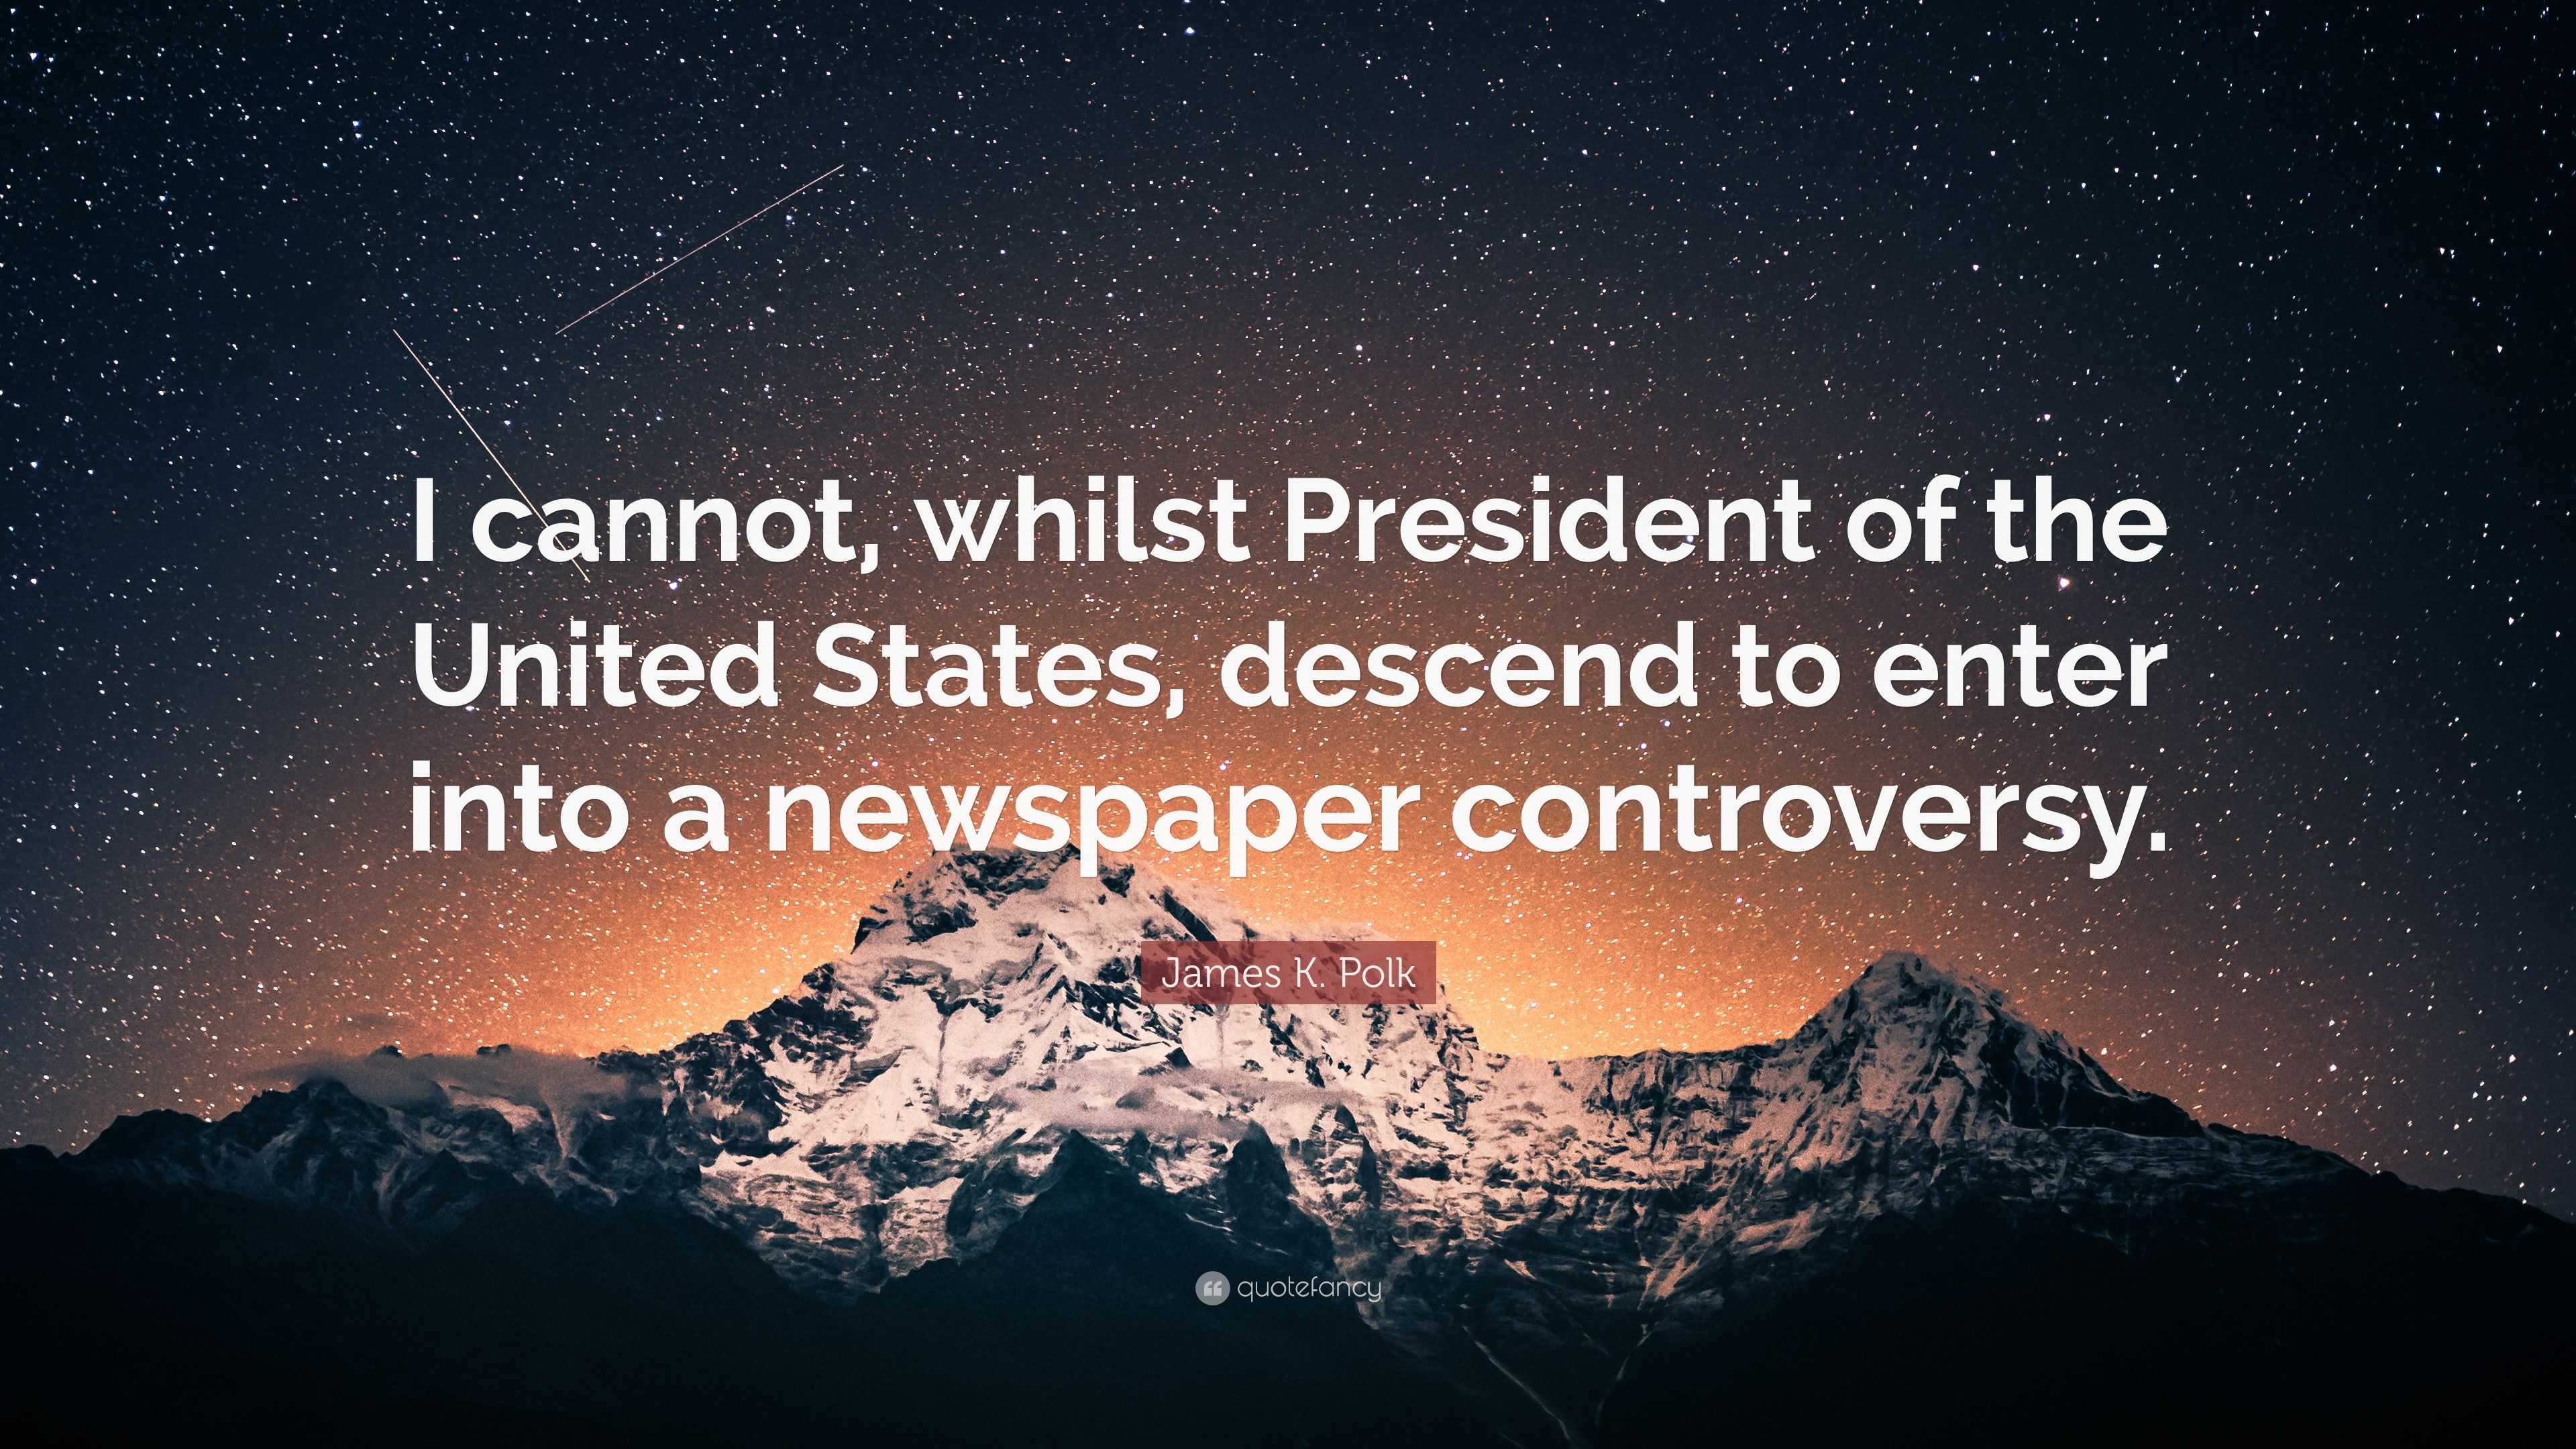 James K. Polk Quote: "I cannot, whilst President of the ...